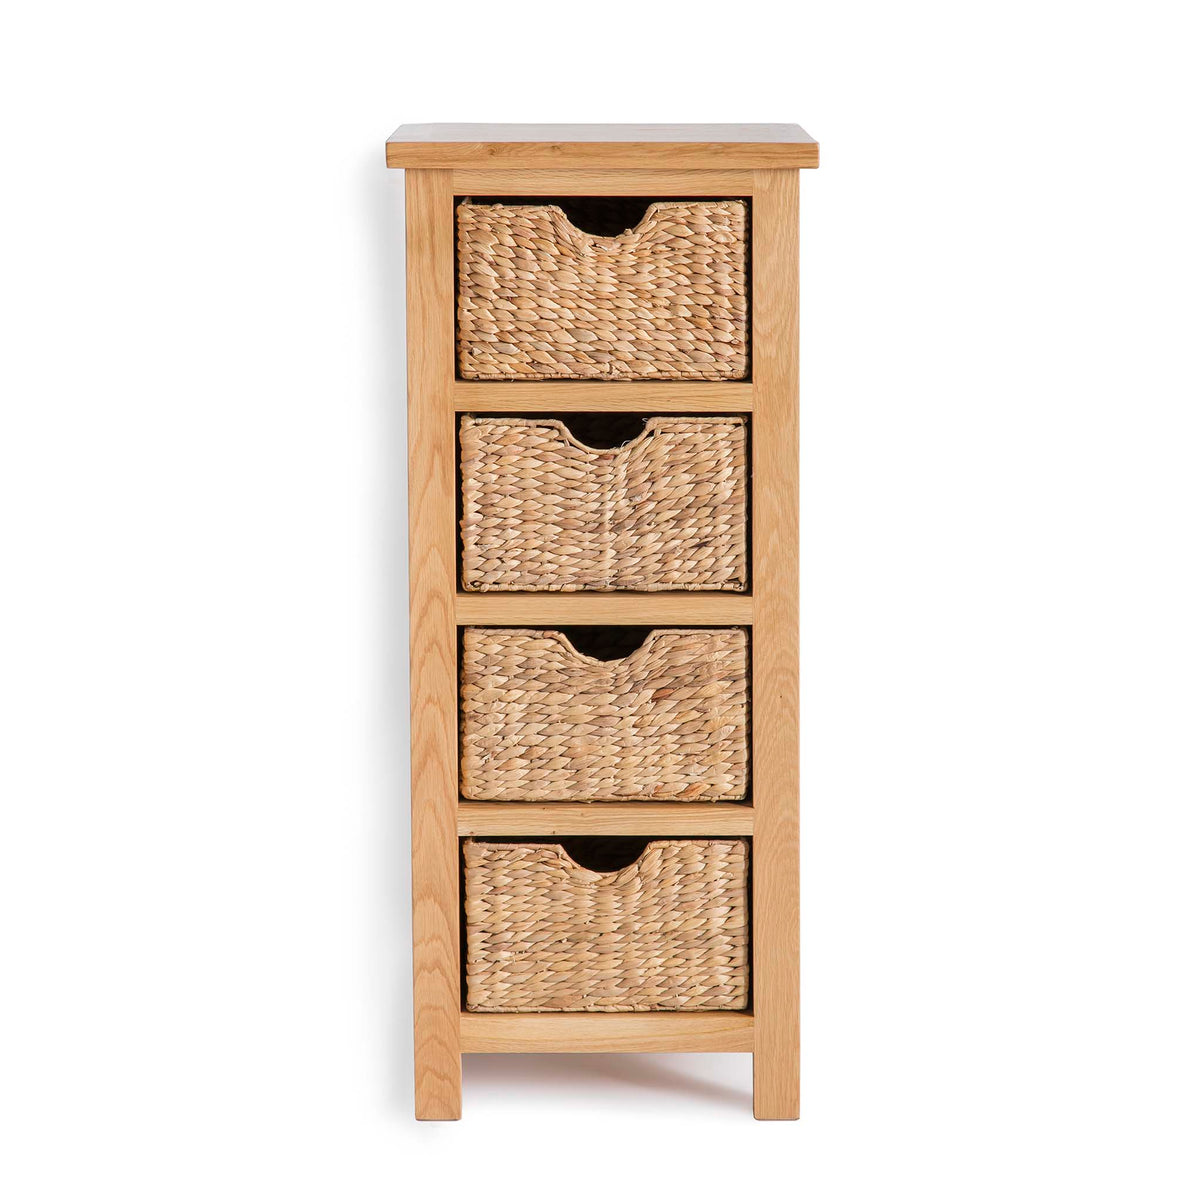 London Oak Tallboy with Baskets by Roseland Furniture